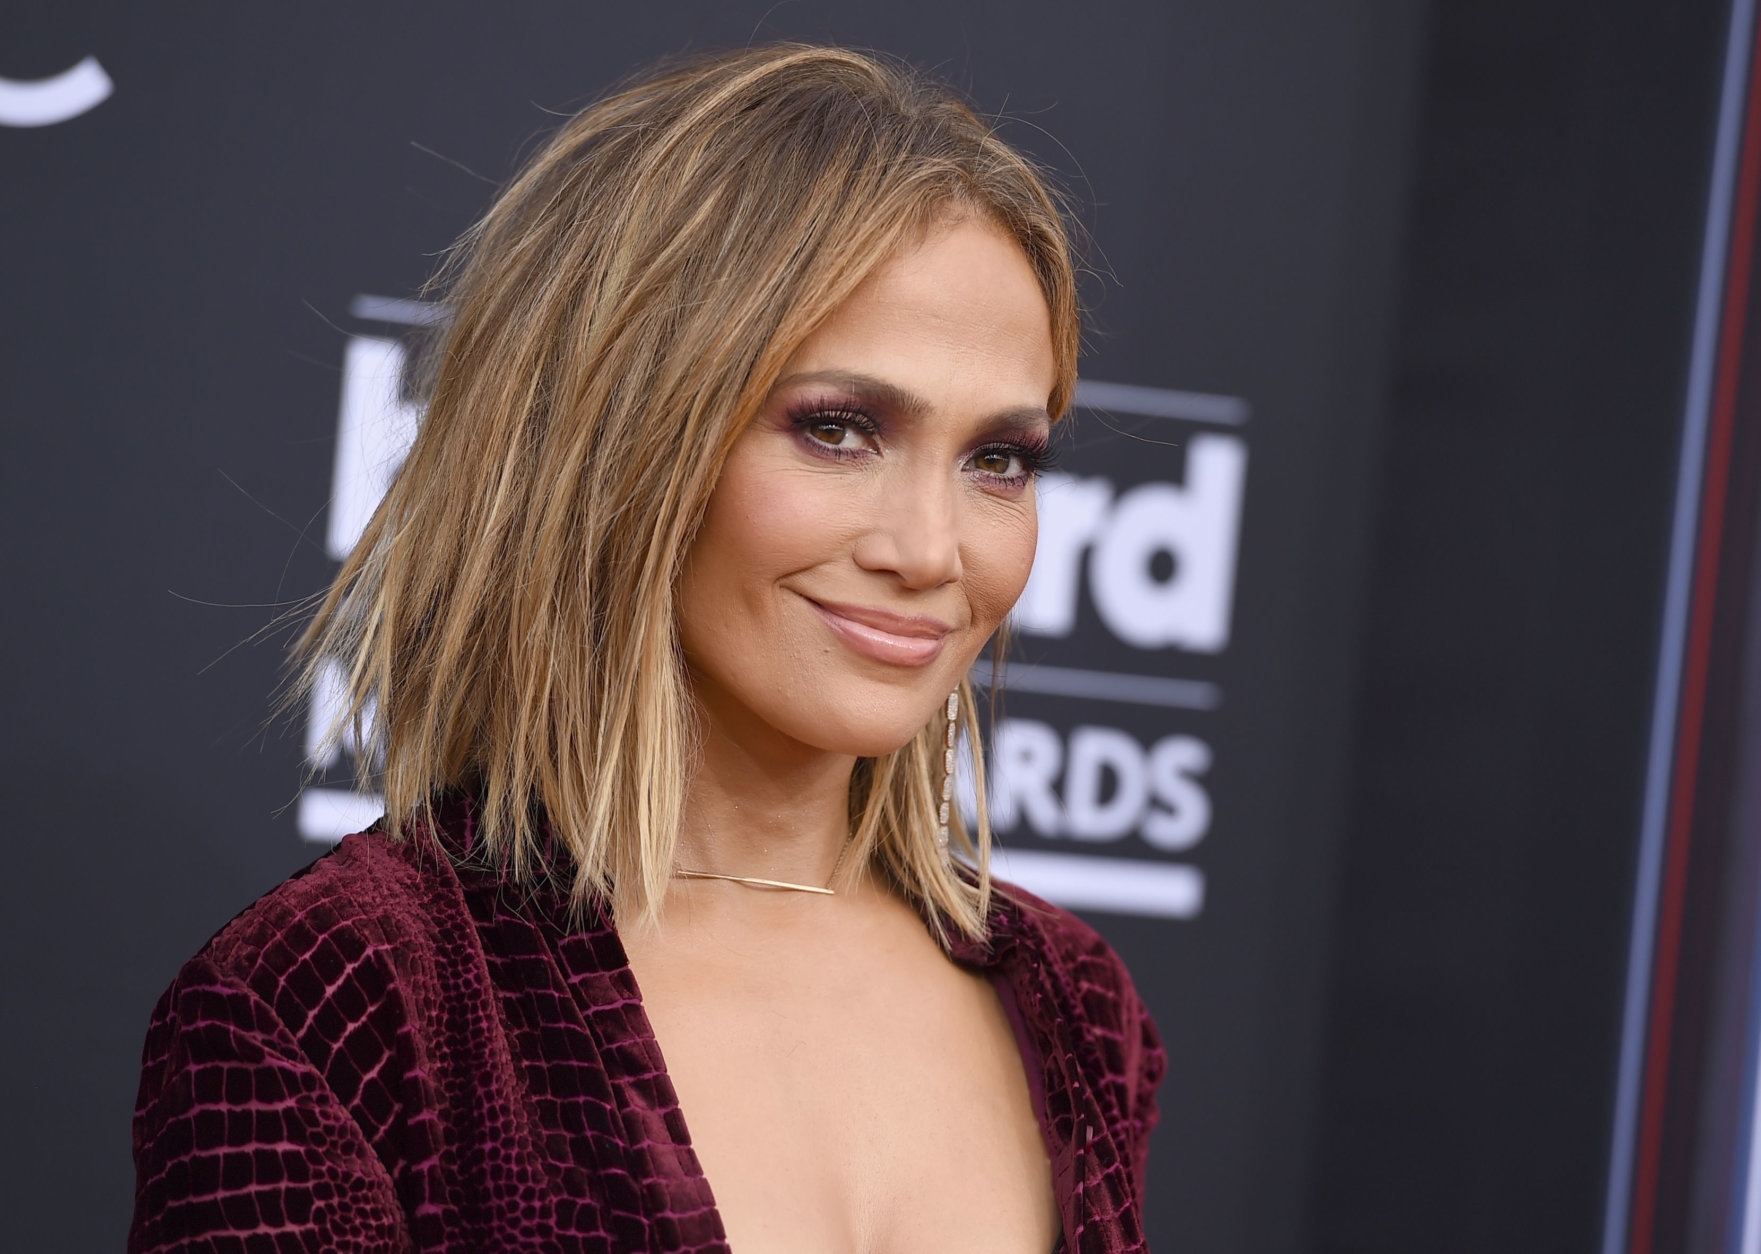 Jennifer Lopez arrives at the Billboard Music Awards at the MGM Grand Garden Arena on Sunday, May 20, 2018, in Las Vegas. (Photo by Jordan Strauss/Invision/AP)